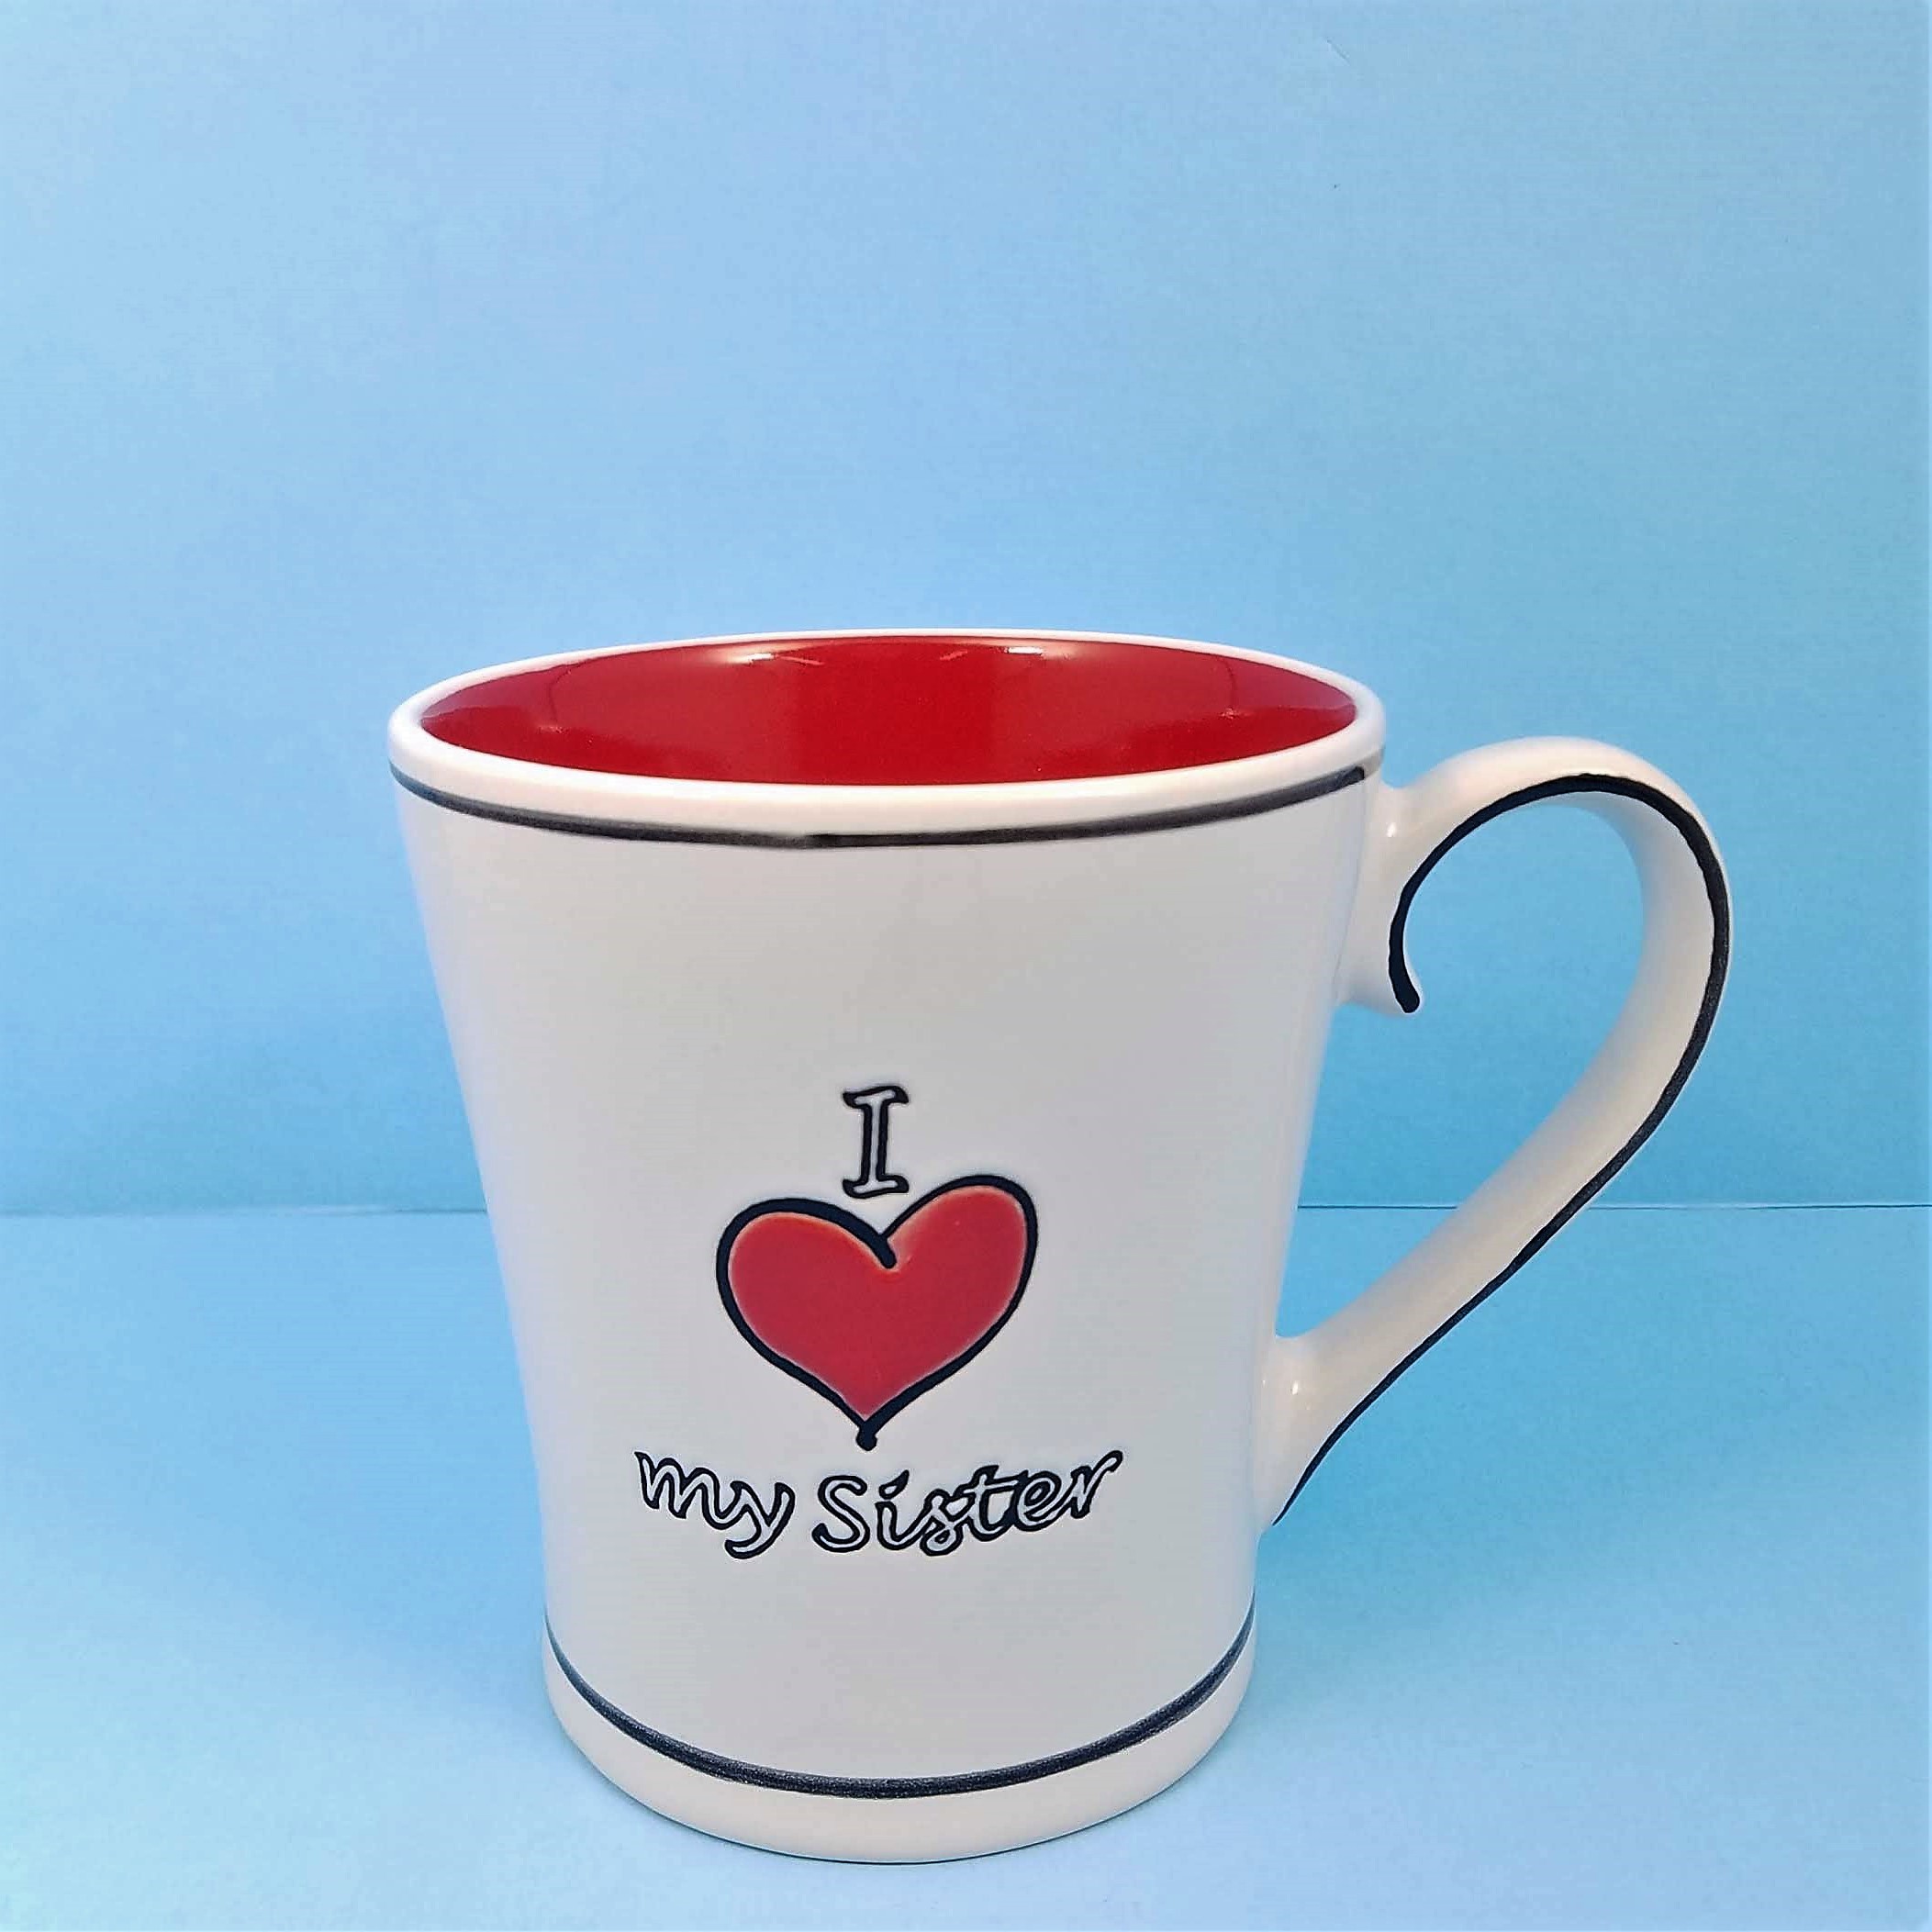 This I Heart My Sister Coffee Cup Mug or Pen Holder Red 17oz by Blue Sky Spectrum is made with love by Premier Homegoods! Shop more unique gift ideas today with Spots Initiatives, the best way to support creators.